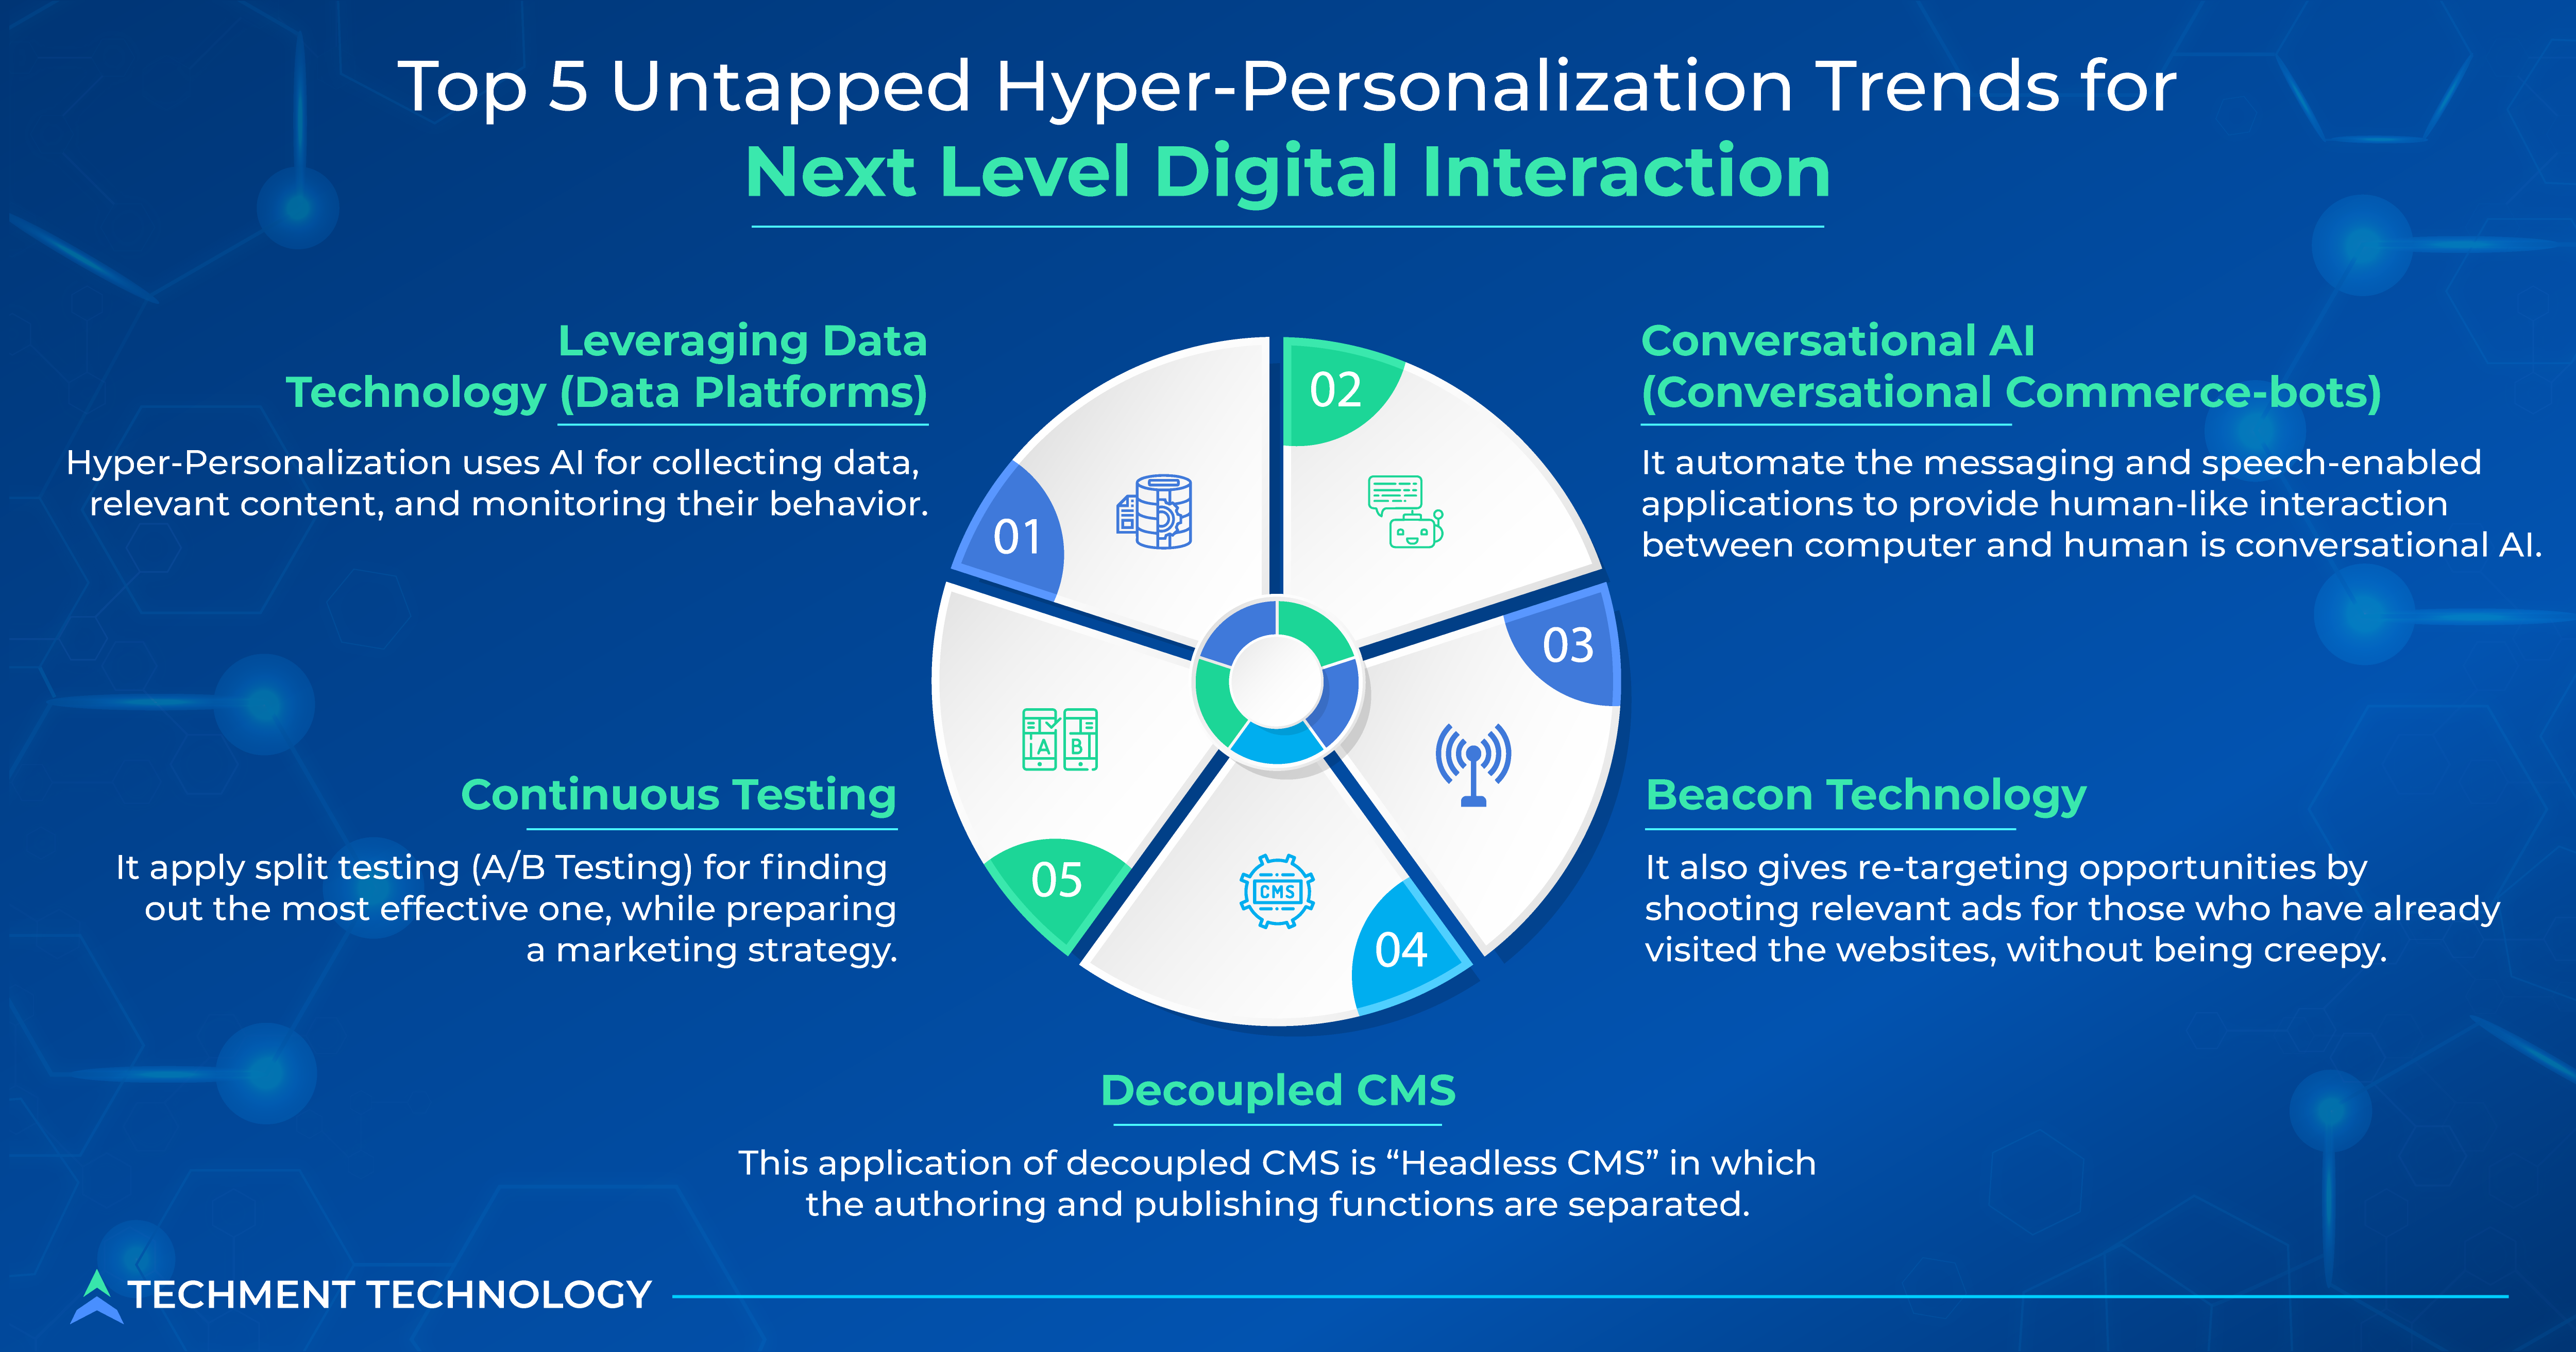 Top 5 Untapped Hyper-Personalization Trends for Next Level Digital Interaction